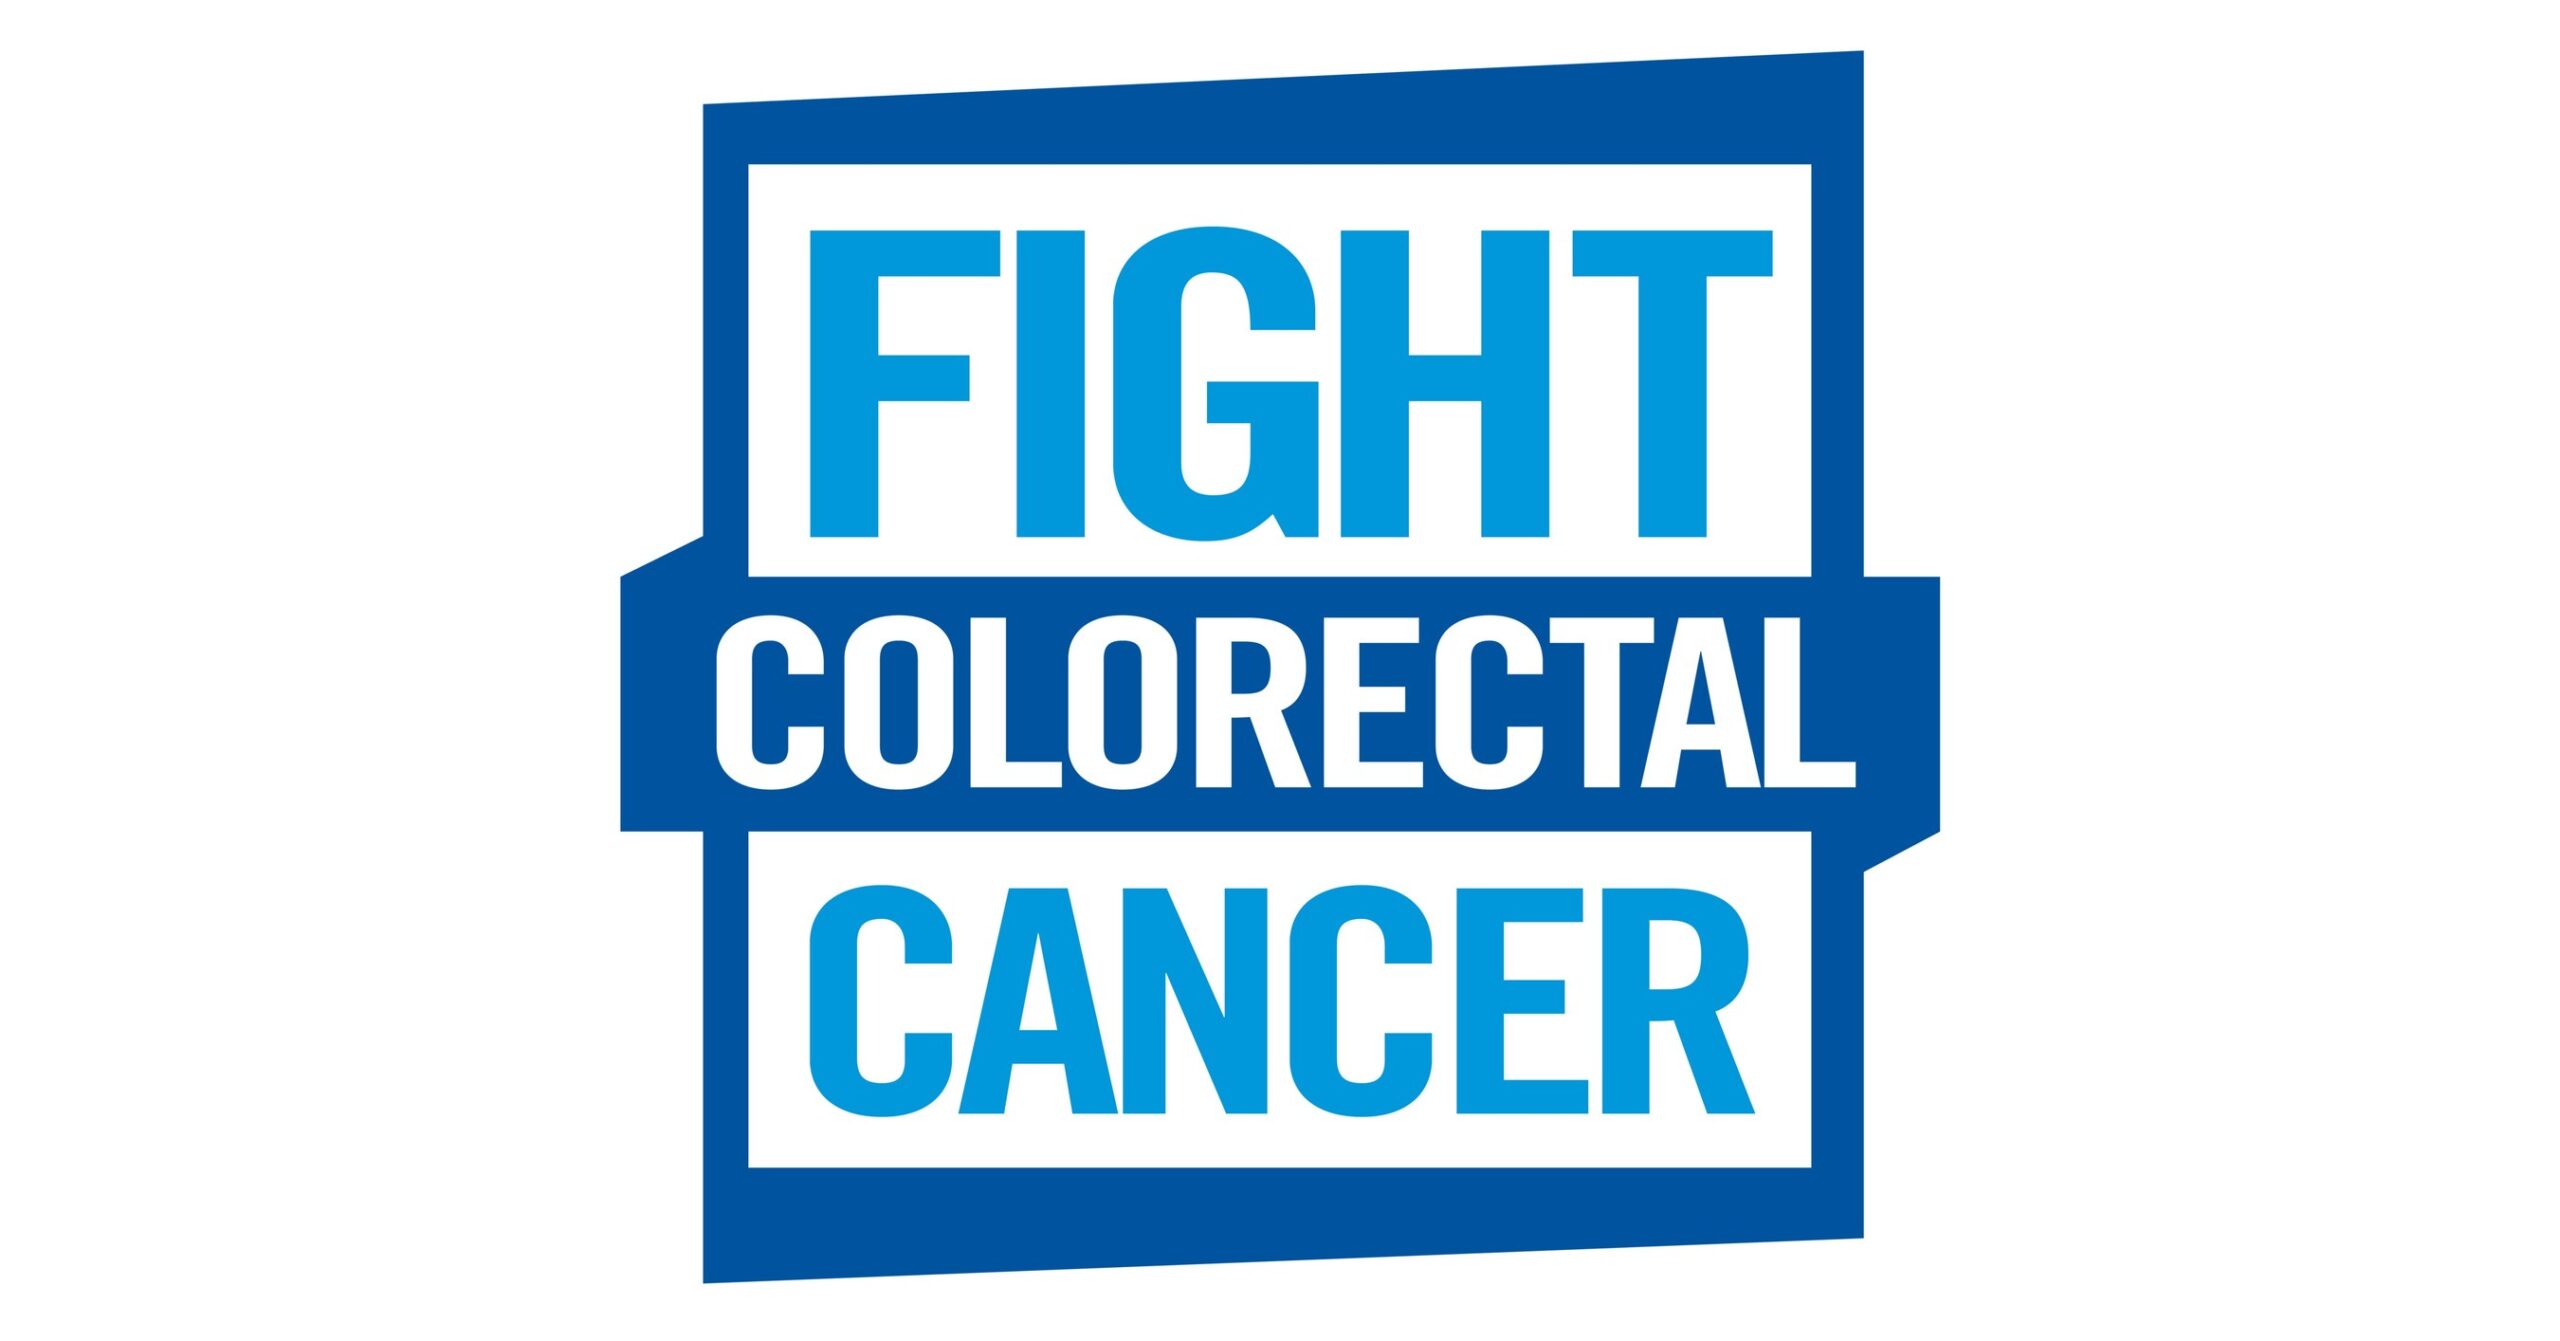 March is Colorectal Cancer Awareness Month